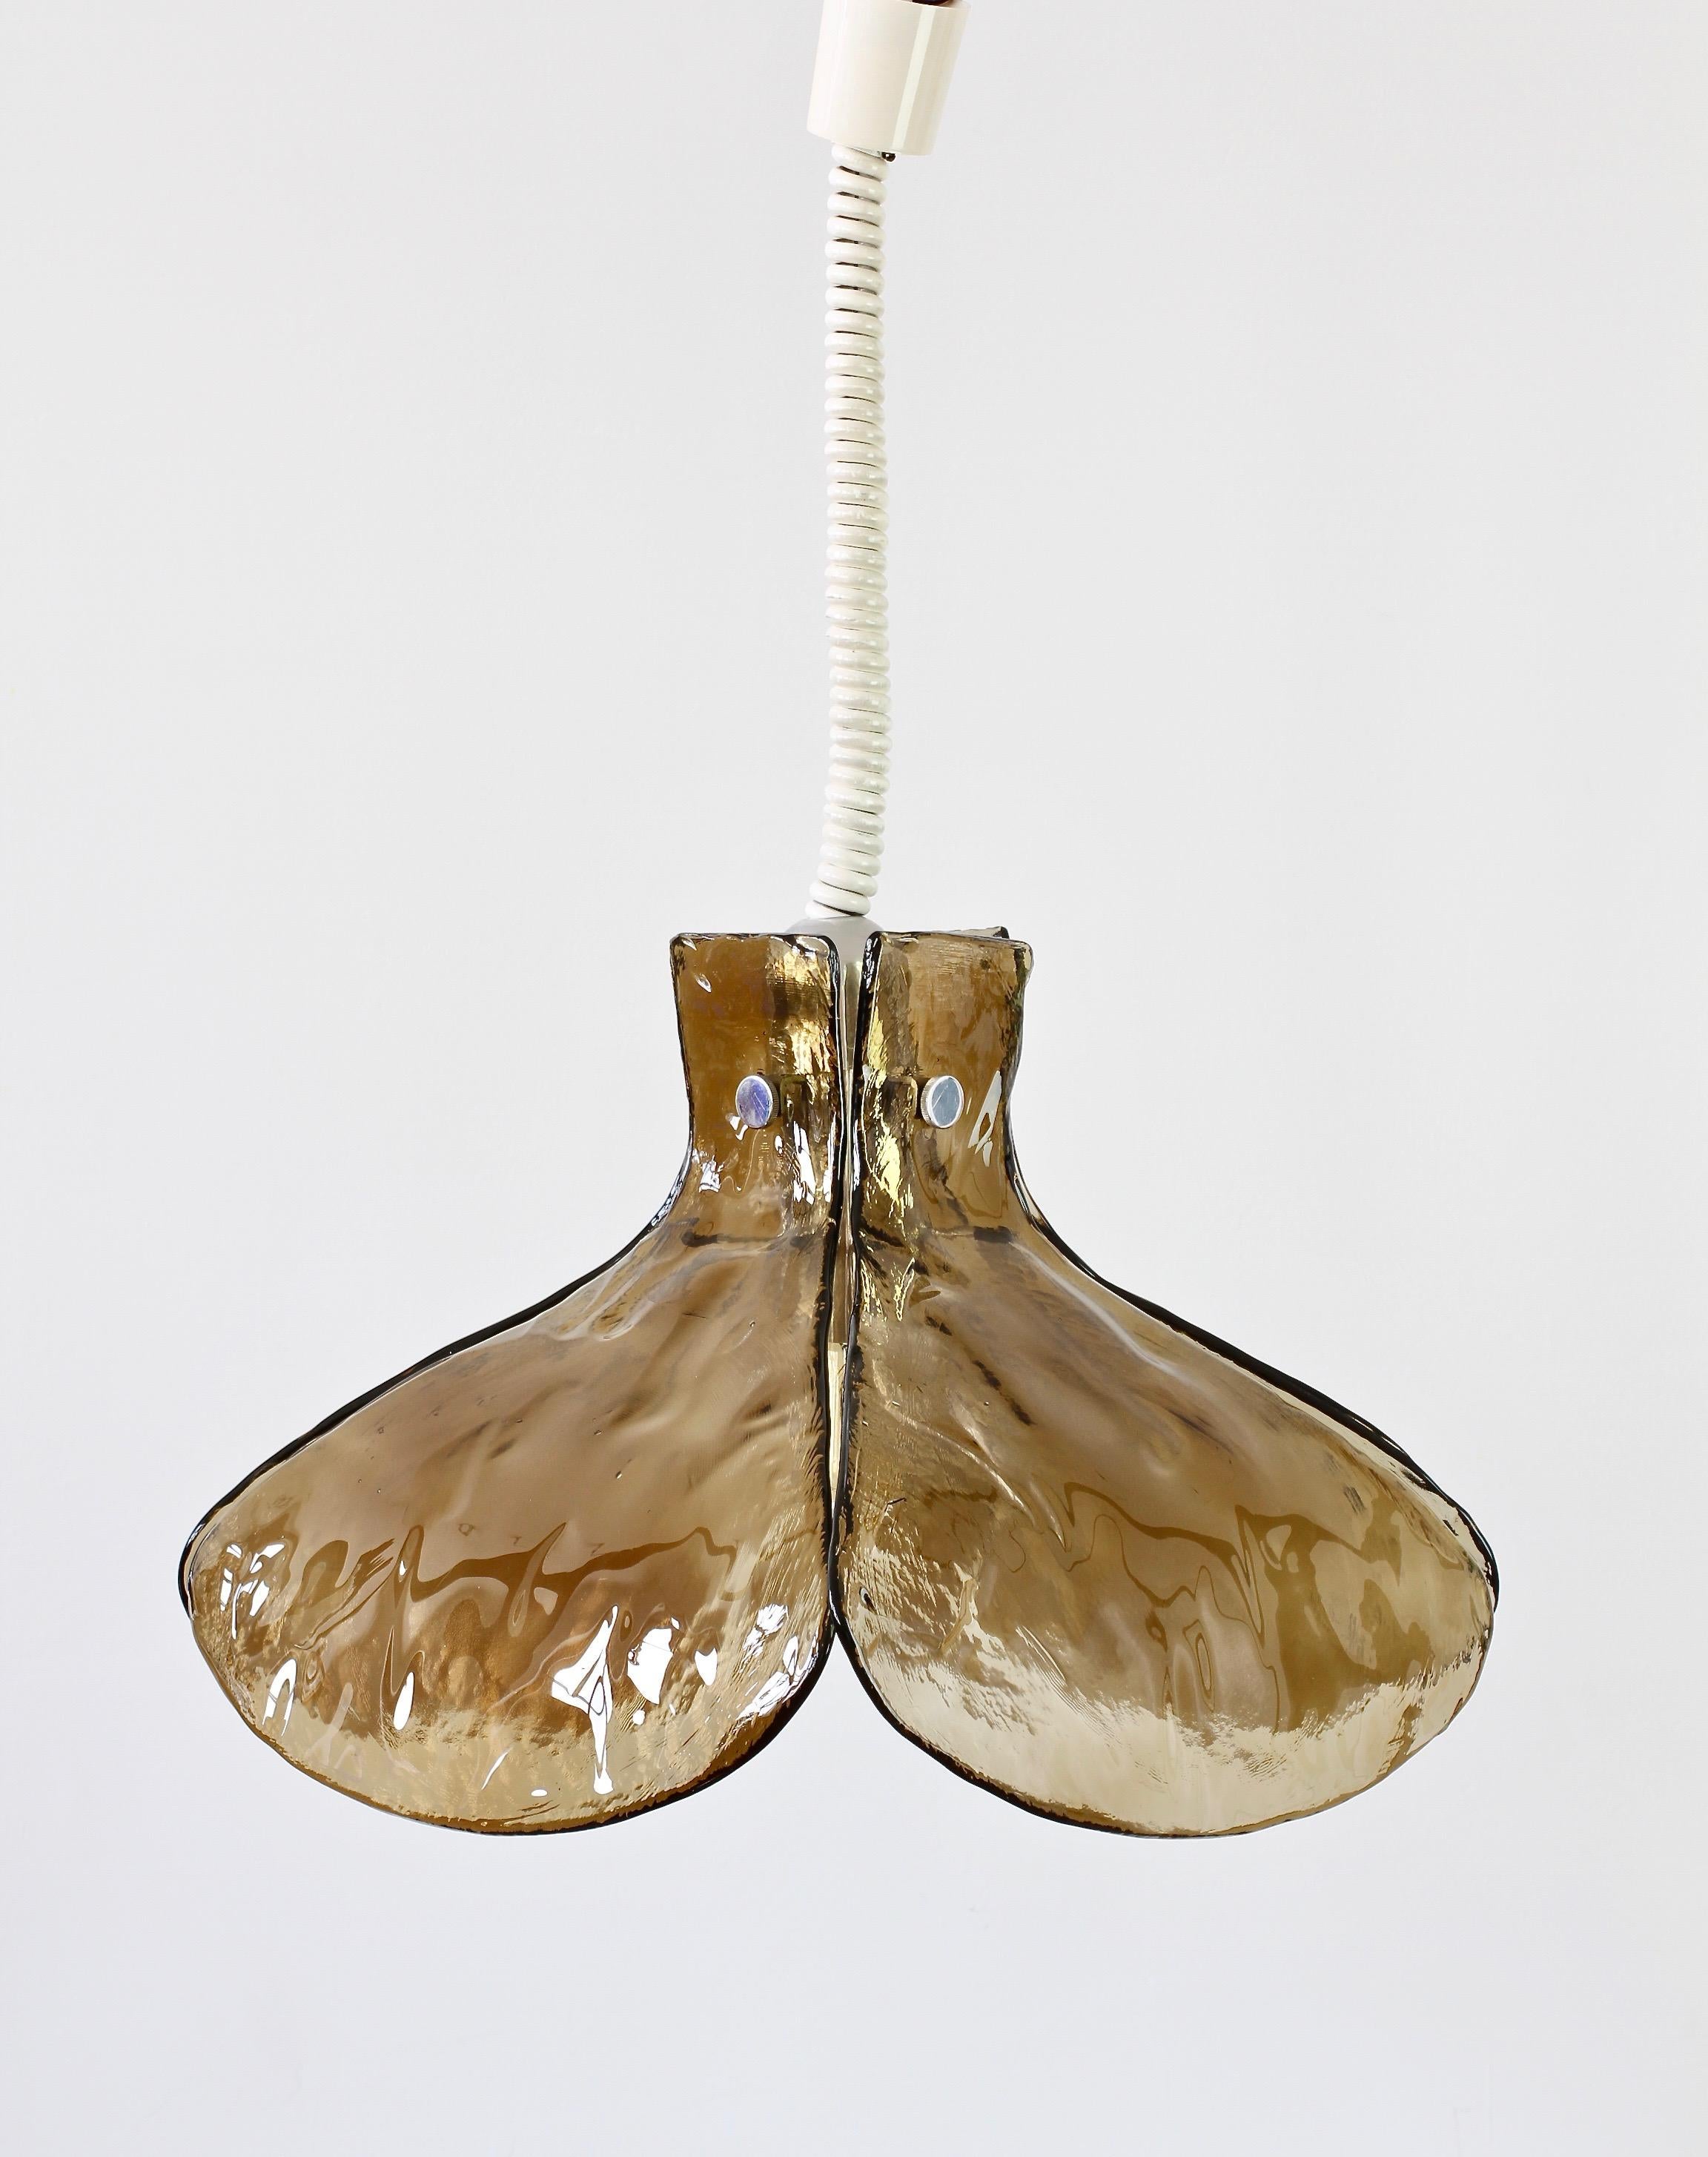 Large vintage midcentury Austrian made dark brown / topaz / smoked glass hanging pendant lamp or light fixture by Kalmar, Austria, circa late 1970s. Featuring four large flower or petal shaped glass elements, made by Italian Murano glass maker